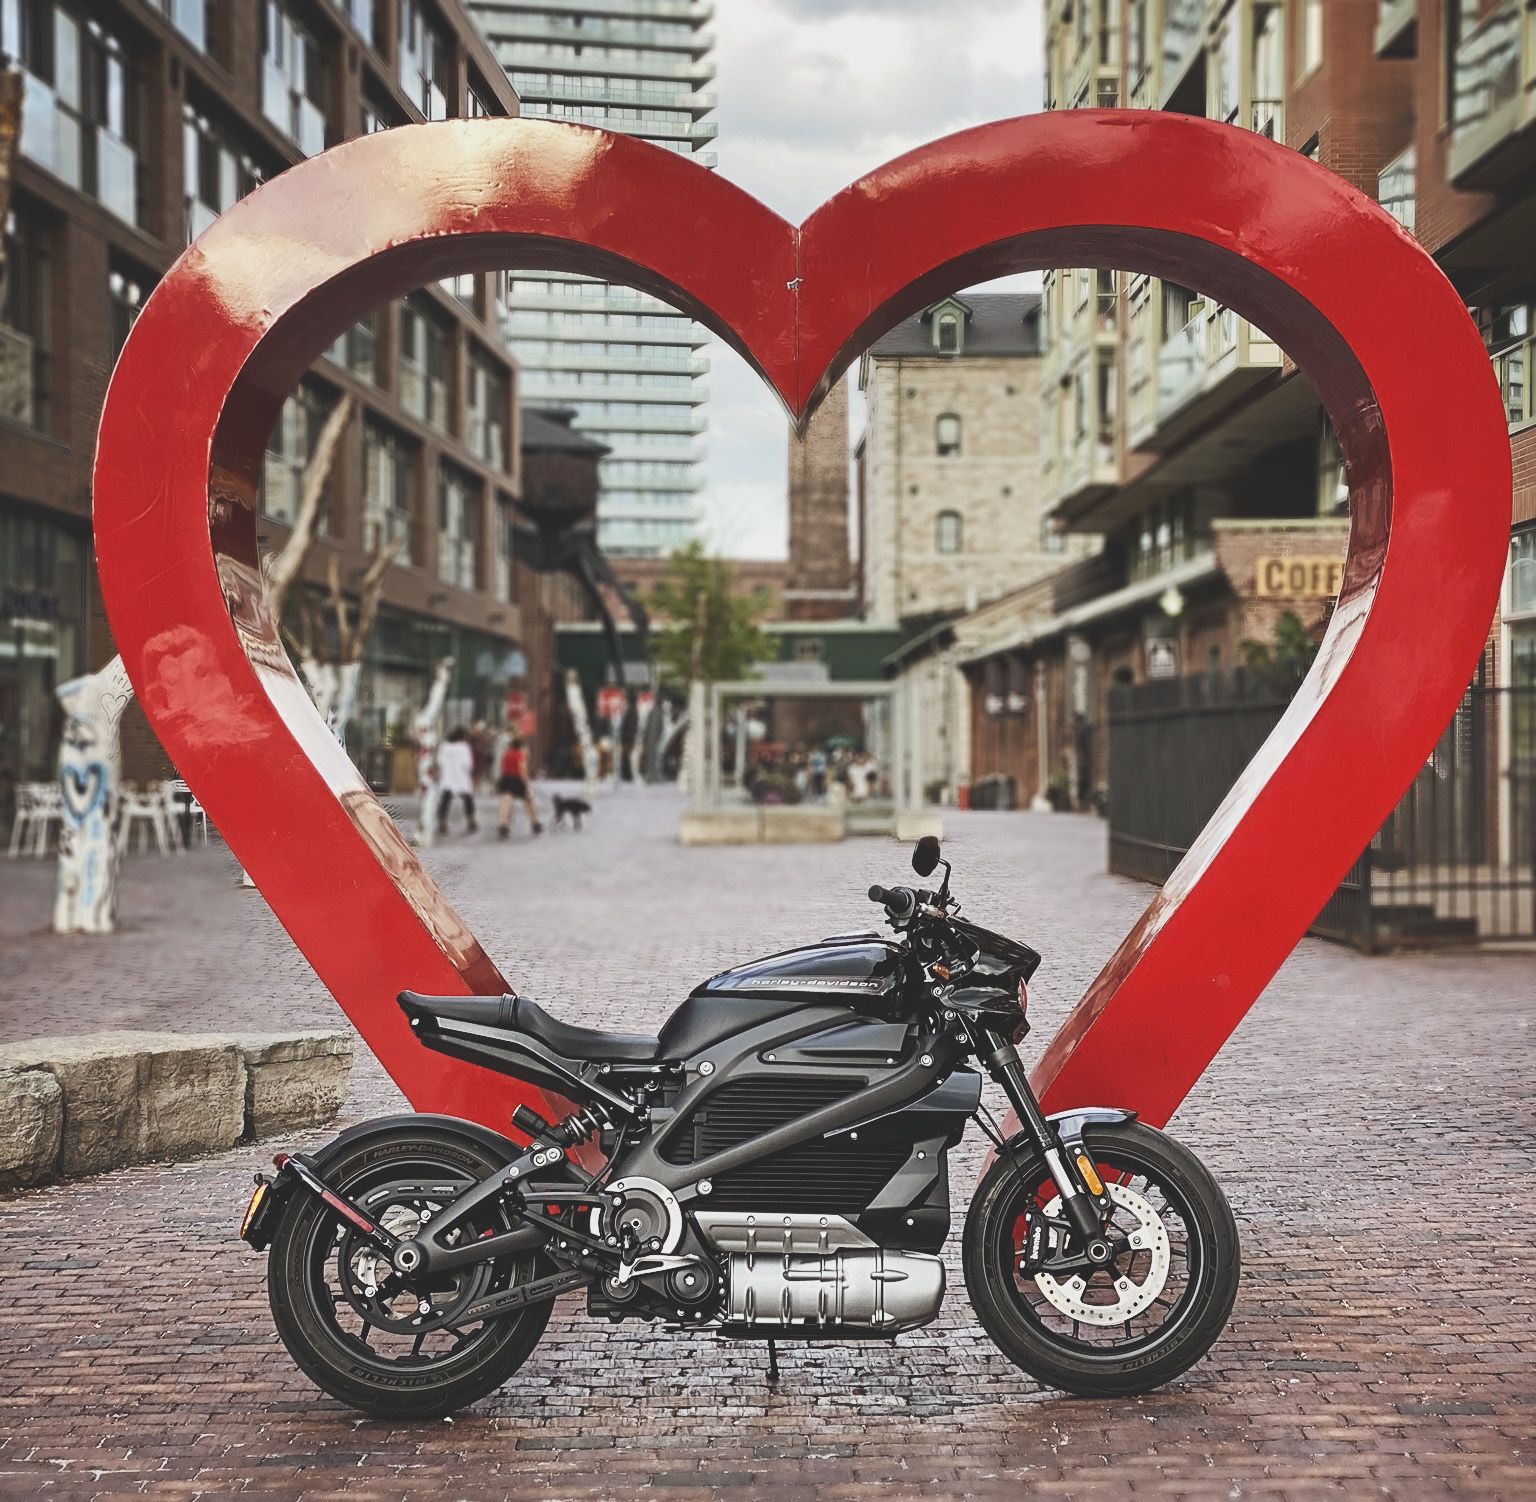 Love it or hate it, Electric motorcycles like the Harley-Davidson LiveWire are here to stay